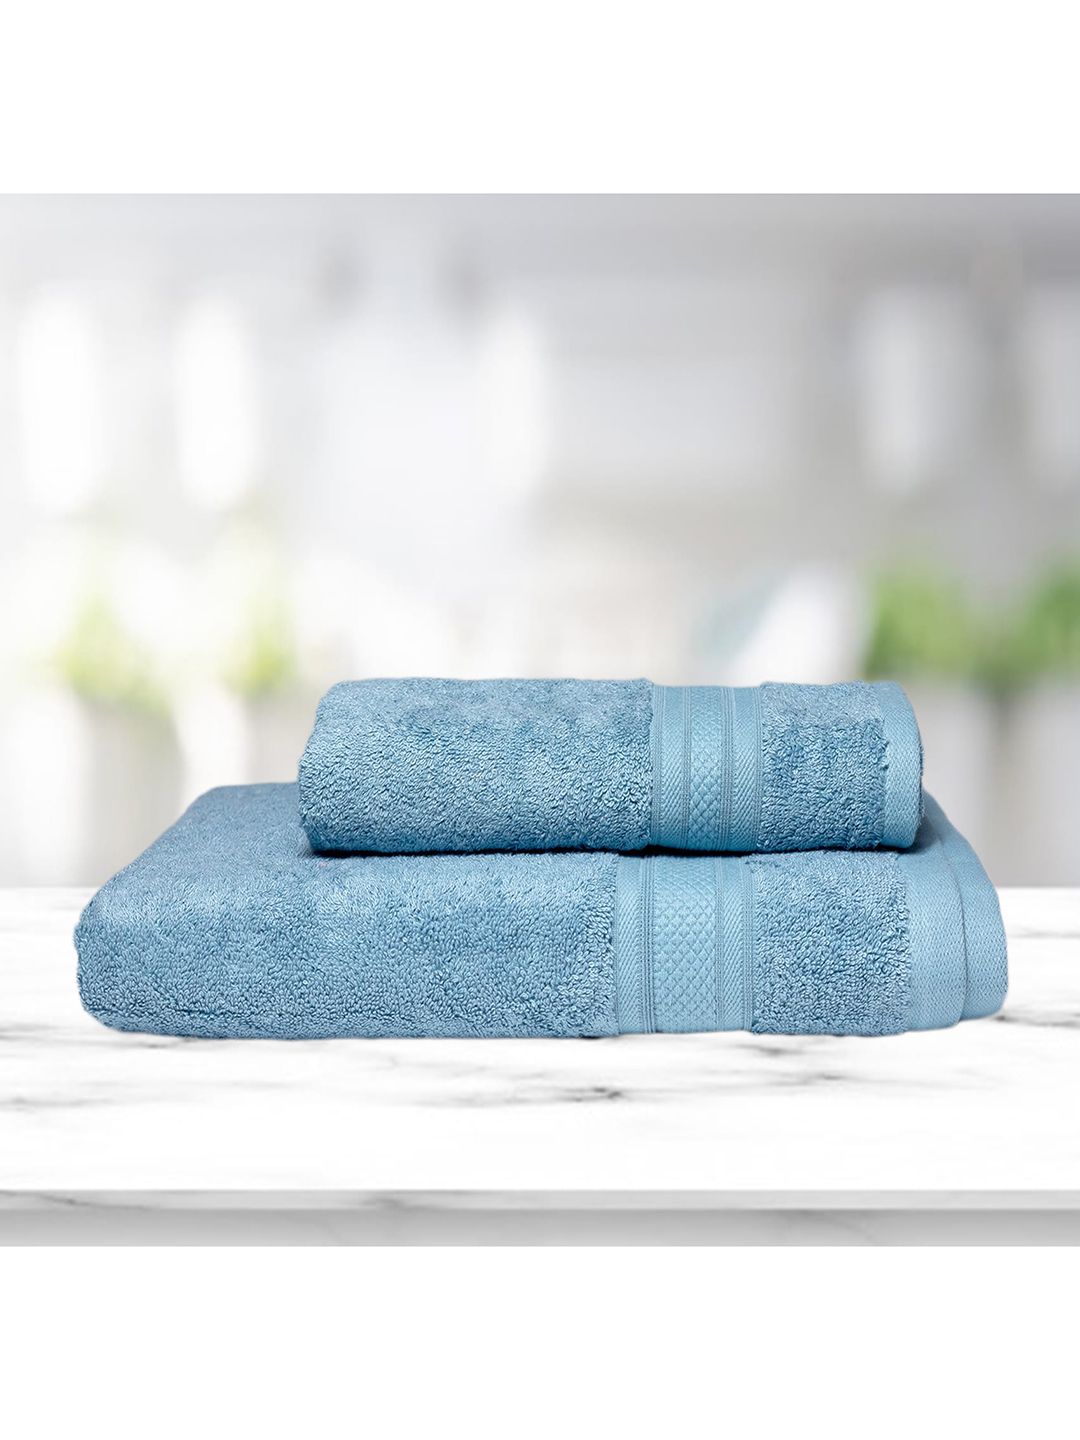 Kawach Blue Antimicrobial Soft Bamboo Towel Set Price in India